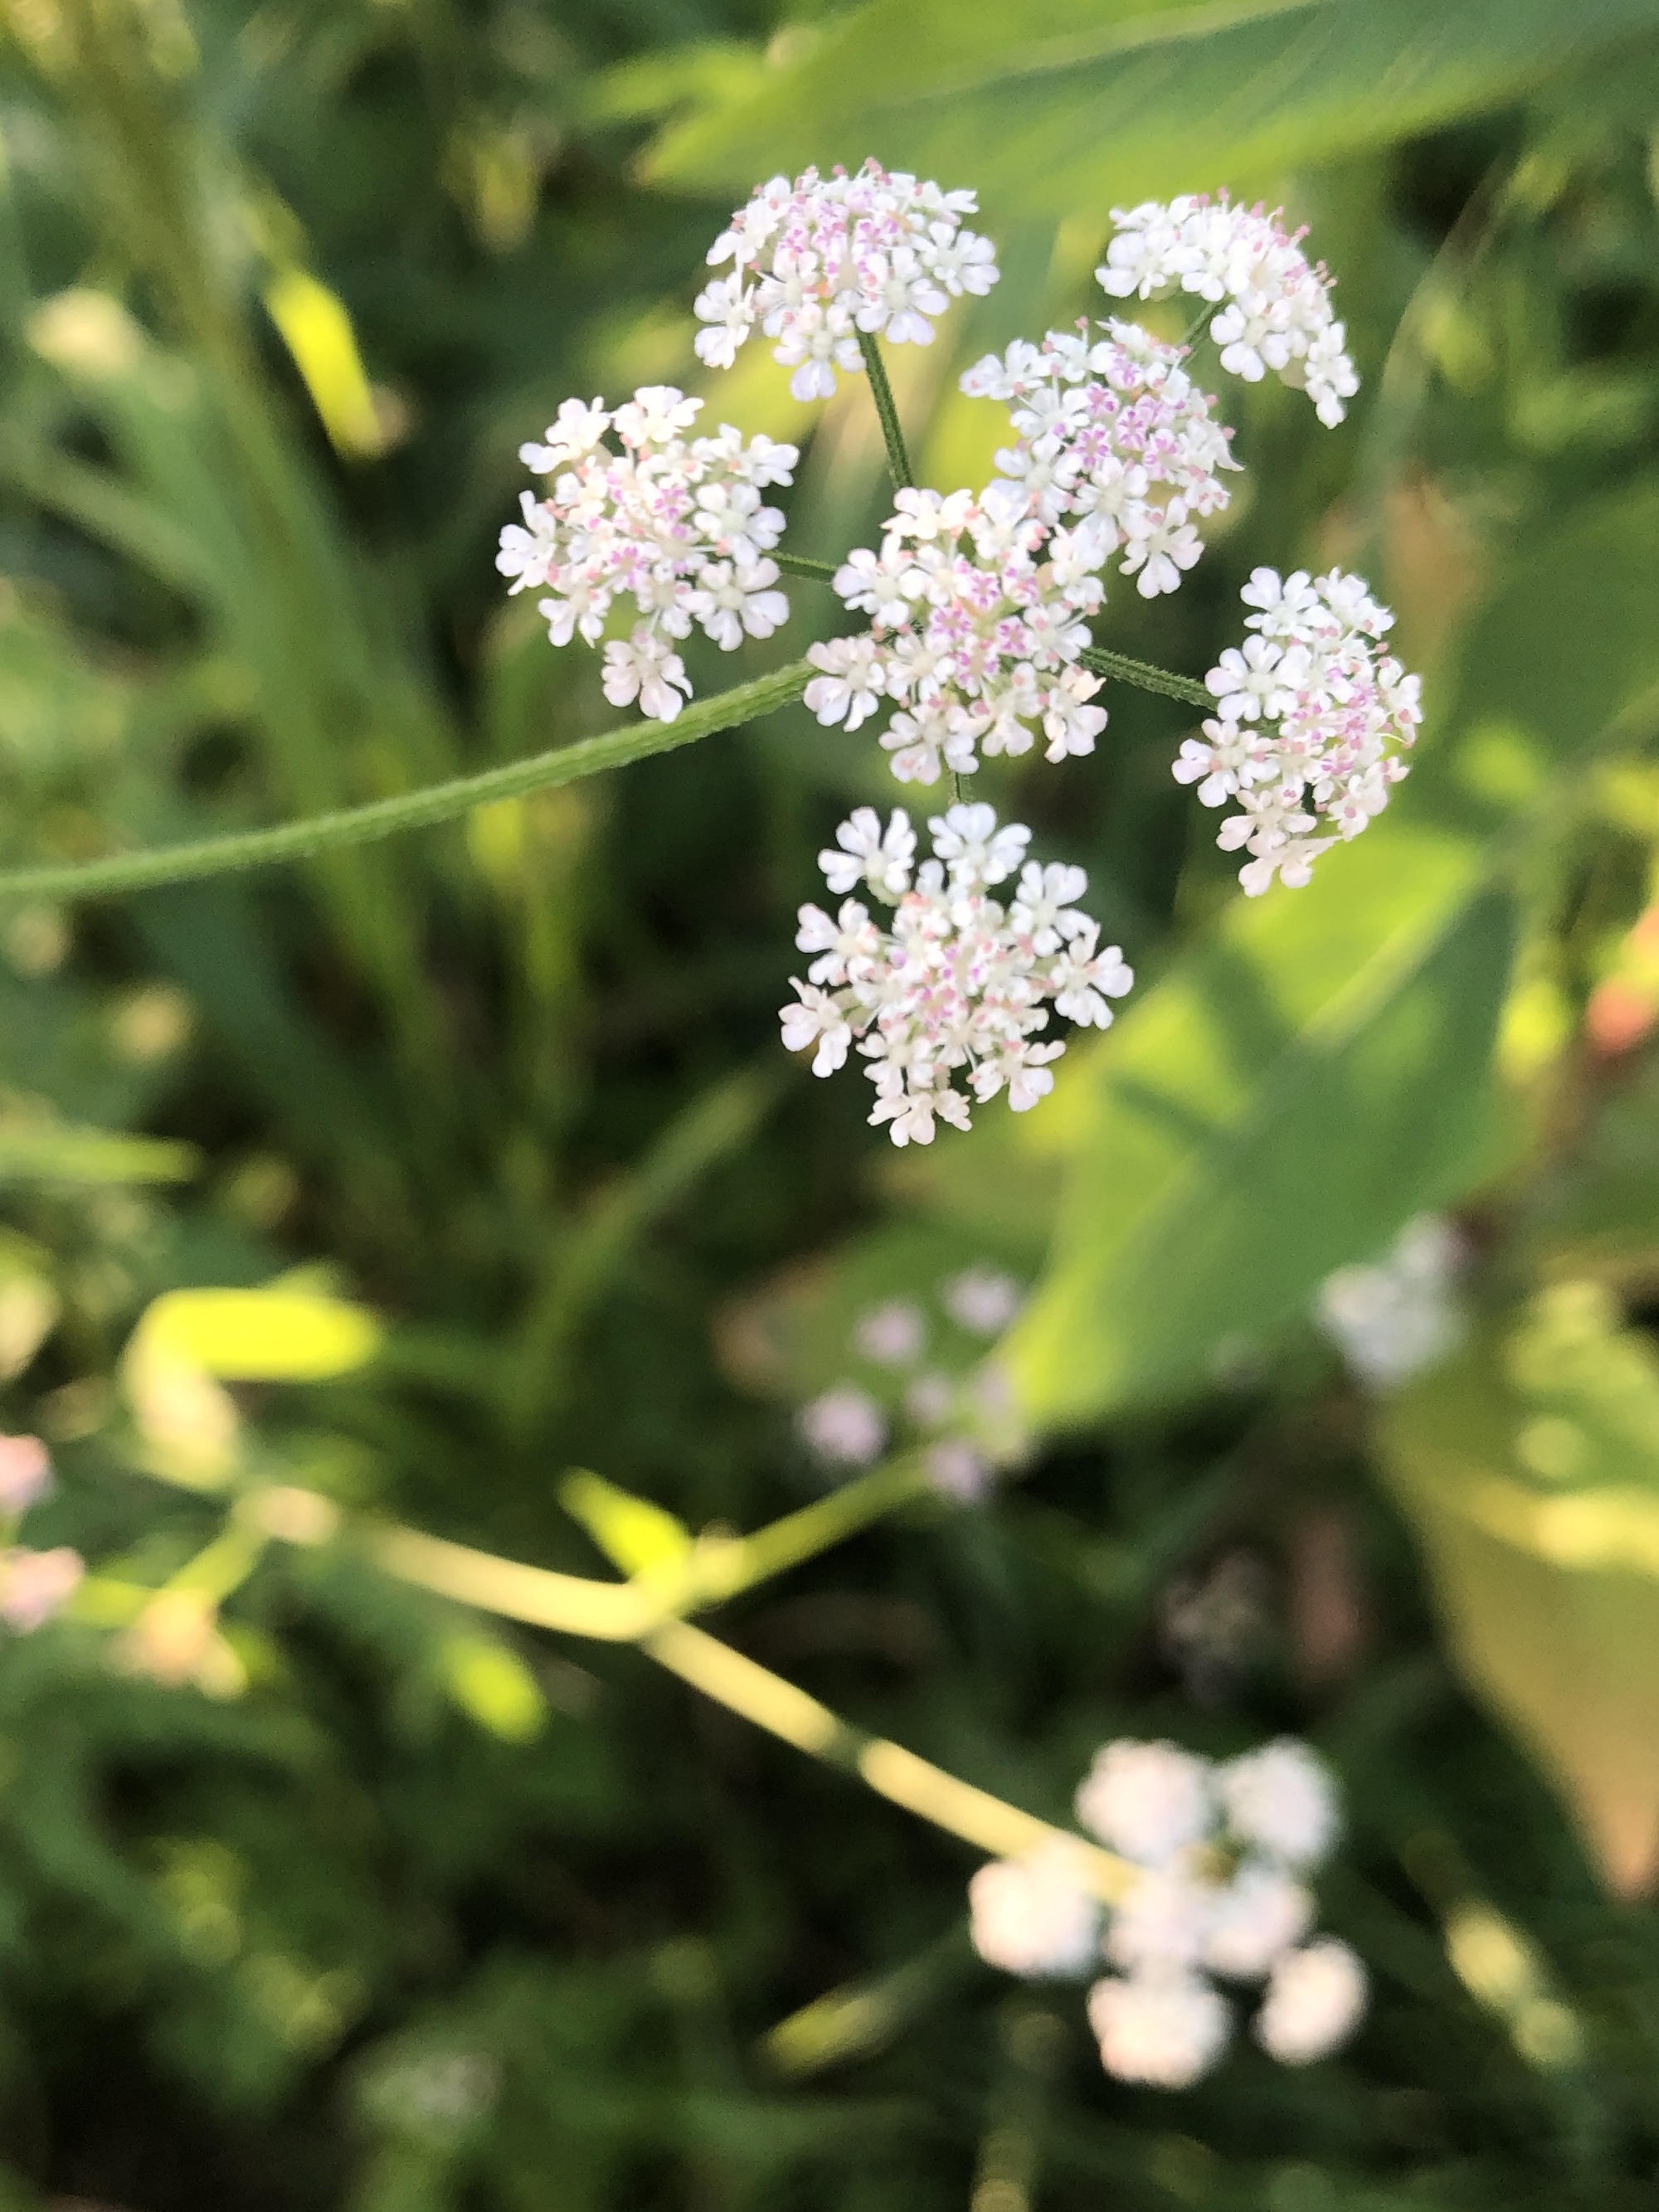 Hedge Parsley in Madison, Wisconsin on July 19, 2022.